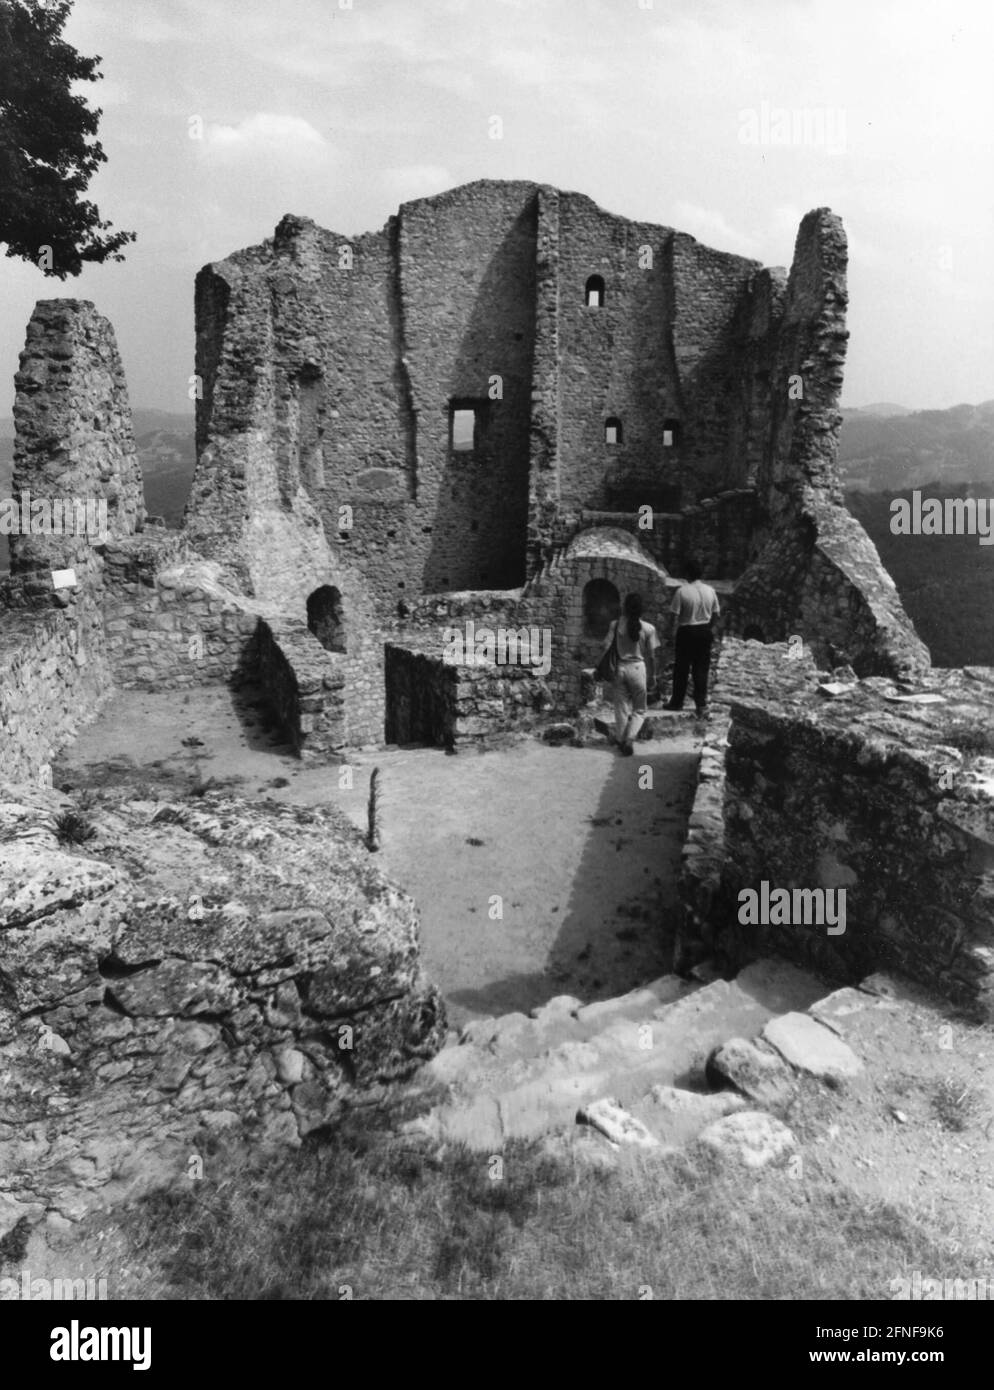 Ruins of the castle of Canossa in the Appenines. Here the German Emperor Henry IV asked Pope Gregory VII to lift the church ban. [automated translation] Stock Photo